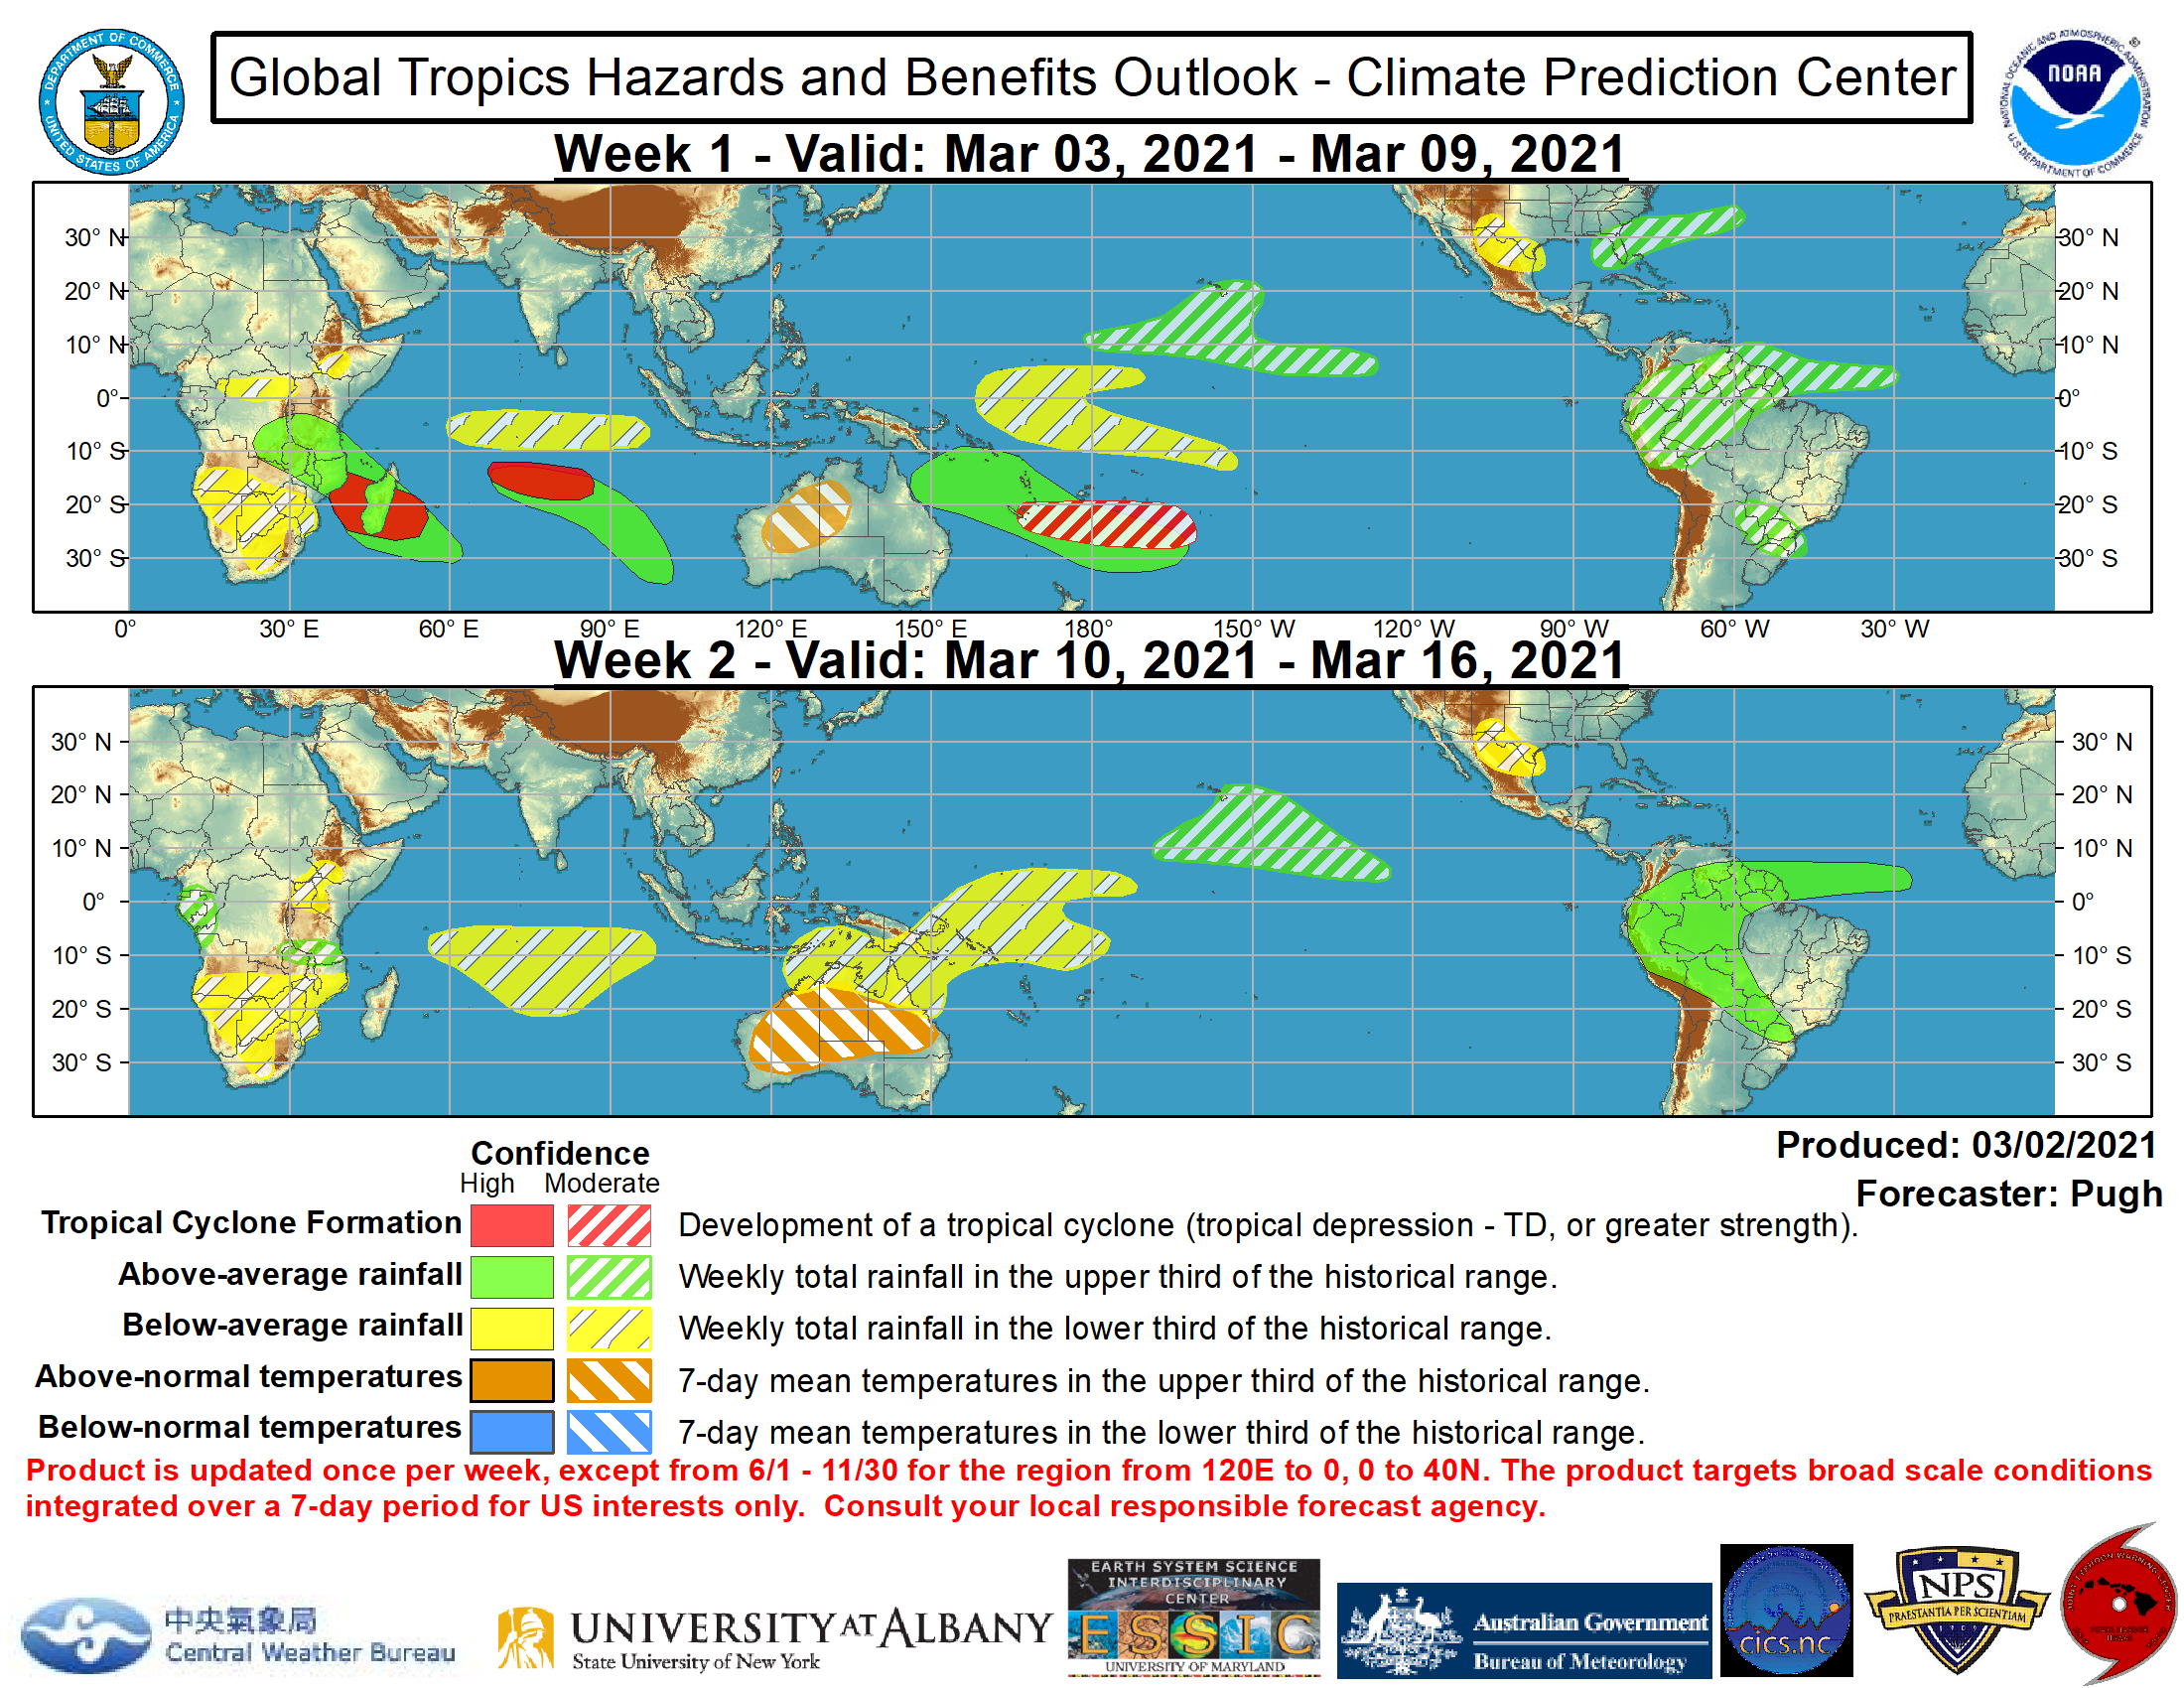 NOAA. ISSUED AT 02/1830UTC. Global Tropics Hazards and Benefits Outlook Discussion Last Updated: 03.02.21 	Valid: 03.03.21 - 03.16.21 Recent observations depict a more coherent MJO, with 200-hPa velocity potential anomalies exhibiting a Wave-1 pattern featuring the most anomalous upper-level divergence (convergence) centered over the West Pacific (Atlantic and Africa). The GEFS and ECMWF models are in good agreement that this MJO propagates eastward from the West Pacific to the Western Hemisphere during early to mid-March. Although there is spread among their ensemble members with the MJO amplitude, forecast confidence is higher than in previous weeks that the MJO influences global tropical rainfall along with tropical cyclone development during weeks 1 and 2. Therefore, MJO precipitation composites for phases 7, 8, and 1 were used in drafting this week�s outlook. In addition to the MJO, the ongoing La Nina is also likely to remain a contributor to anomalous tropical rainfall during March.  A couple of tropical cyclones (TCs) developed during late February. Tropical Cyclone Marian, which initially formed to the south of Java, tracked westward and strengthened over the South Indian Ocean. As of 12Z March 2, Marian has sustained winds of 90 knots and is located at 18.7S/89.8E and is forecast to gradually weaken later in week-1 as it tracks poleward. Tropical Cyclone Niran has remained nearly stationary to the east of Cairns, Australia. The Joint Typhoon Warning Center calls for Niran to begin accelerating southeastward and could track over or near New Caledonia on March 5 or 6. During week-1, multiple TCs are forecast to develop across parts of the South Indian Ocean and South Pacific. A weak area of low pressure is currently located over the Mozambique Channel, while another surface low is located to the east of Madagascar. Based on good model continuity and agreement, high confidence exists that both of these areas of low pressure become TCs from March 3-9. Meanwhile, the enhanced phase of the MJO and model guidance also support at least a moderate confidence of TC development over the South Pacific during week-1. Following this continued active period through early March, a less favorable large-scale environment is expected for TC development during week-2, as anomalous upper-level convergence is expected to overspread the Indian Ocean, Australia, and the South Pacific.  Favored areas of above and below median precipitation are based on: predicted tracks of TCs, a model consensus, MJO precipitation composites (phases 7, 8, and 1) and typical influences from La Nina. Much of the above median precipitation (week-1) across the Indian Ocean and South Pacific is related to either ongoing TCs and/or the additional development of TCs. An overall drying trend is anticipated across the Indian Ocean, Australia, and Southwest Pacific during week-2. Parts of South America are likely to see a wetter pattern during the next two weeks, with an increased risk of heavy rainfall and flooding, especially for Ecuador, Peru, and southern Colombia. Following near to below normal temperatures during late February, above normal temperatures are likely for Western Australia and the Northern Territory of Australia during early March with an expansion of these above normal temperatures forecast across much of Australia by week-2.  During week-1, a suppressed mid-latitude low pressure system interacting with an enhanced moisture feed from the subtropics favors above median precipitation from the Florida Peninsula northeast to Bermuda. Consistent with ongoing La Nina conditions, below median precipitation is favored for parts of the southwestern United States and northern Mexico during weeks 1 and 2. For hazardous weather concerns during the upcoming two weeks across the U.S. please refer to your local NWS Forecast Office, the Weather Prediction Center's Medium Range Hazards Forecast, and CPC's Week-2 U.S. Hazards Outlook. Forecasts over Africa are made in consultation with the International Desk at CPC and can represent local-scale conditions in addition to global-scale variability.